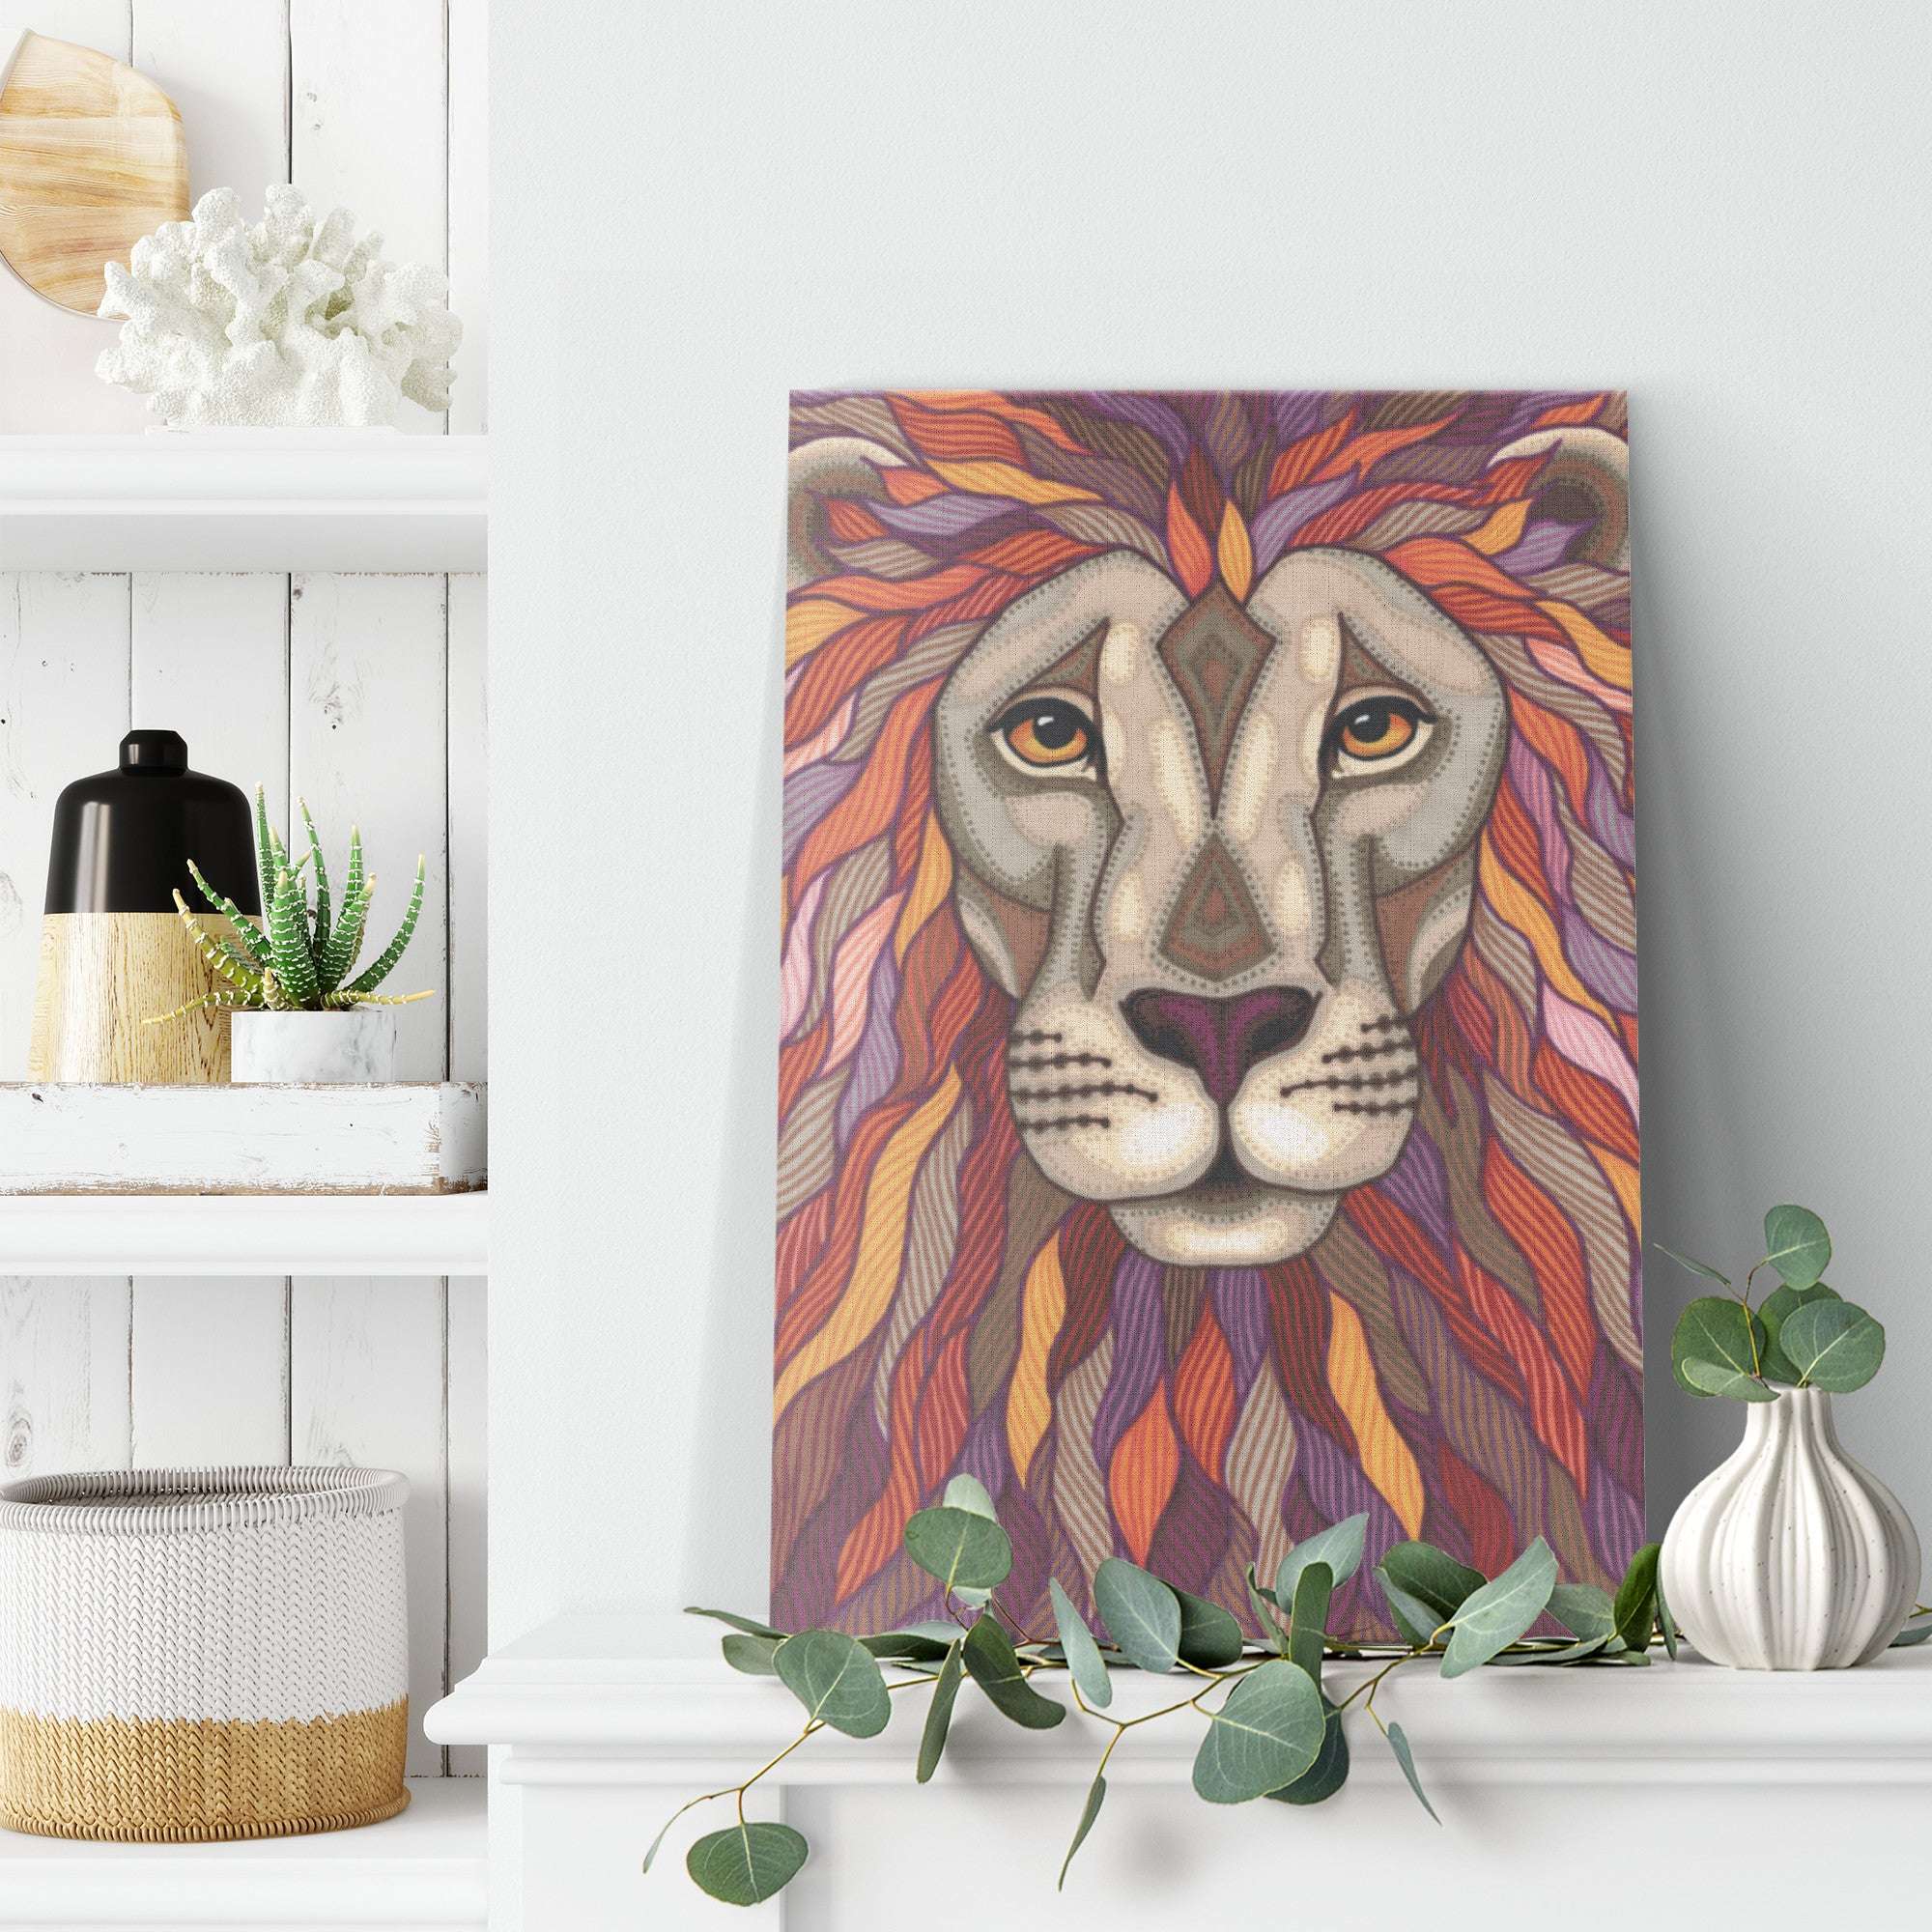 A Lion Pride Canvas Print hangs on a white wall above a shelf with decorative items and plants.